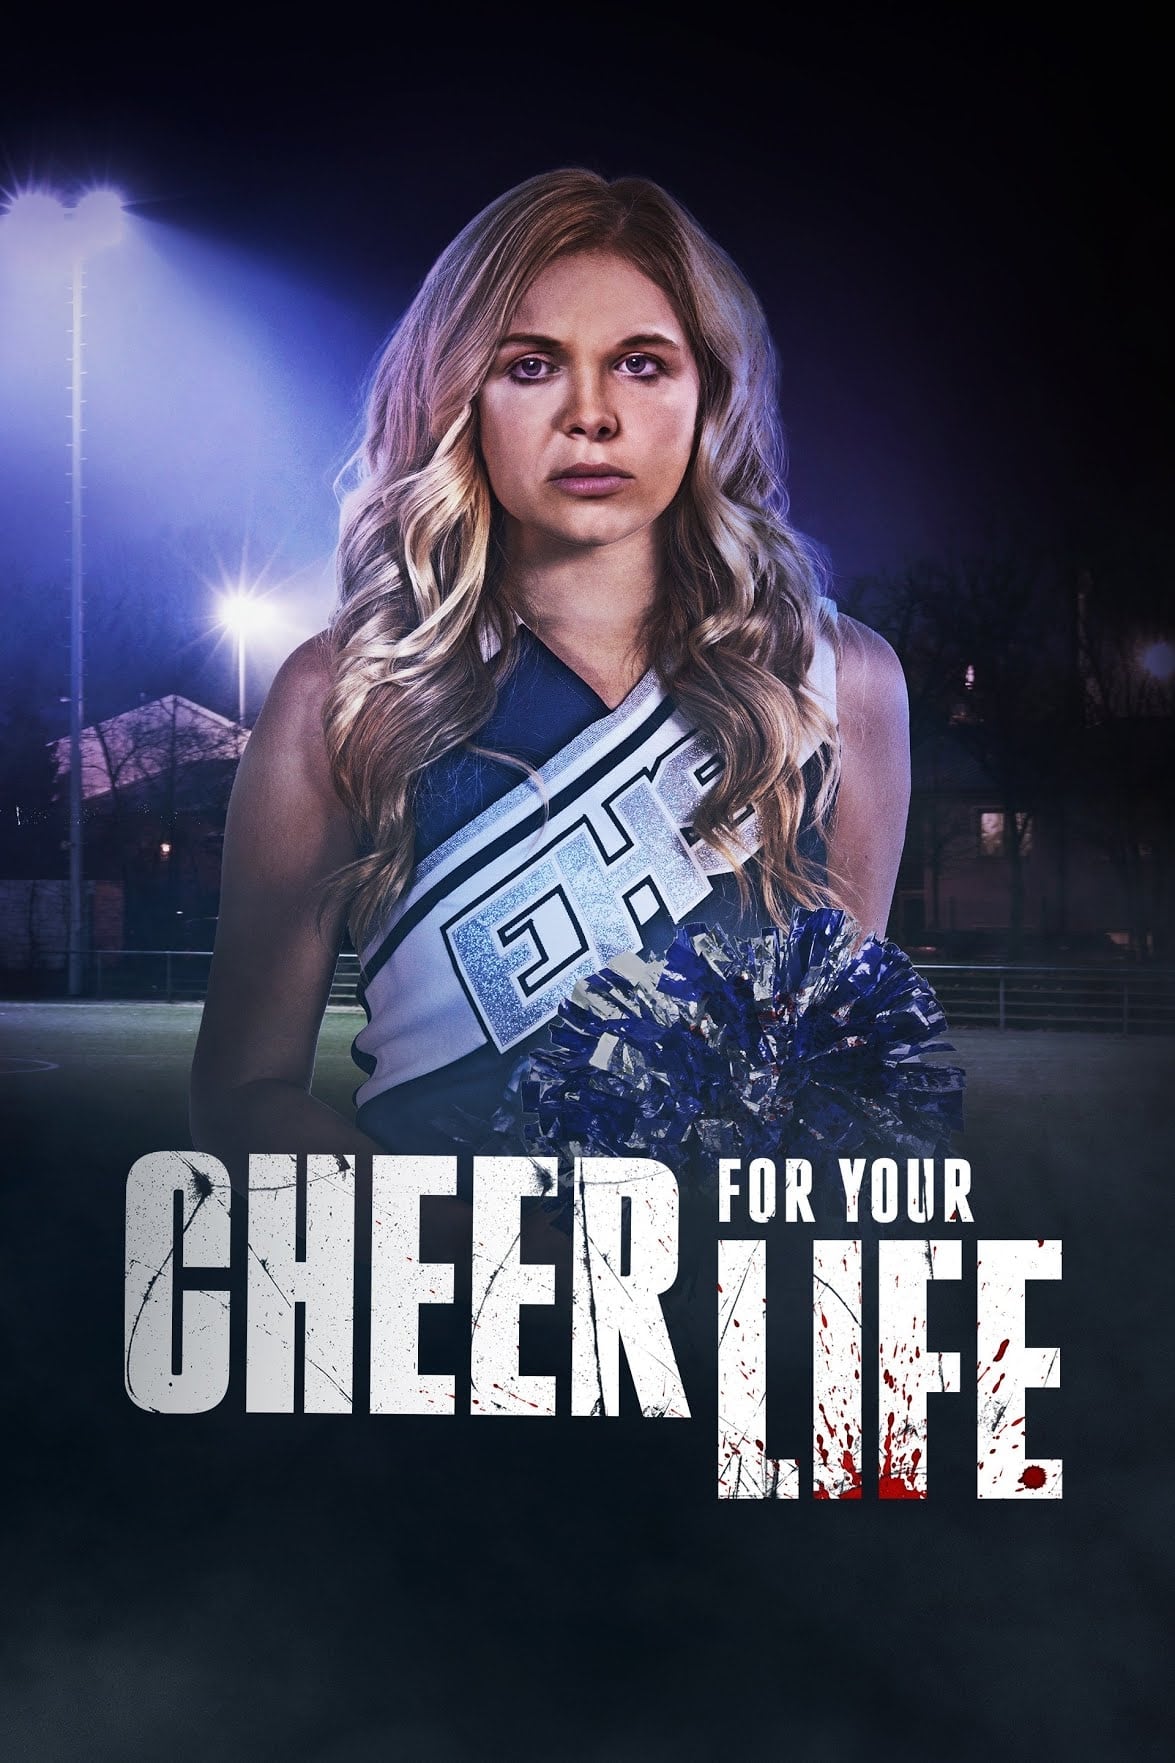 Cheer for your Life (2021)